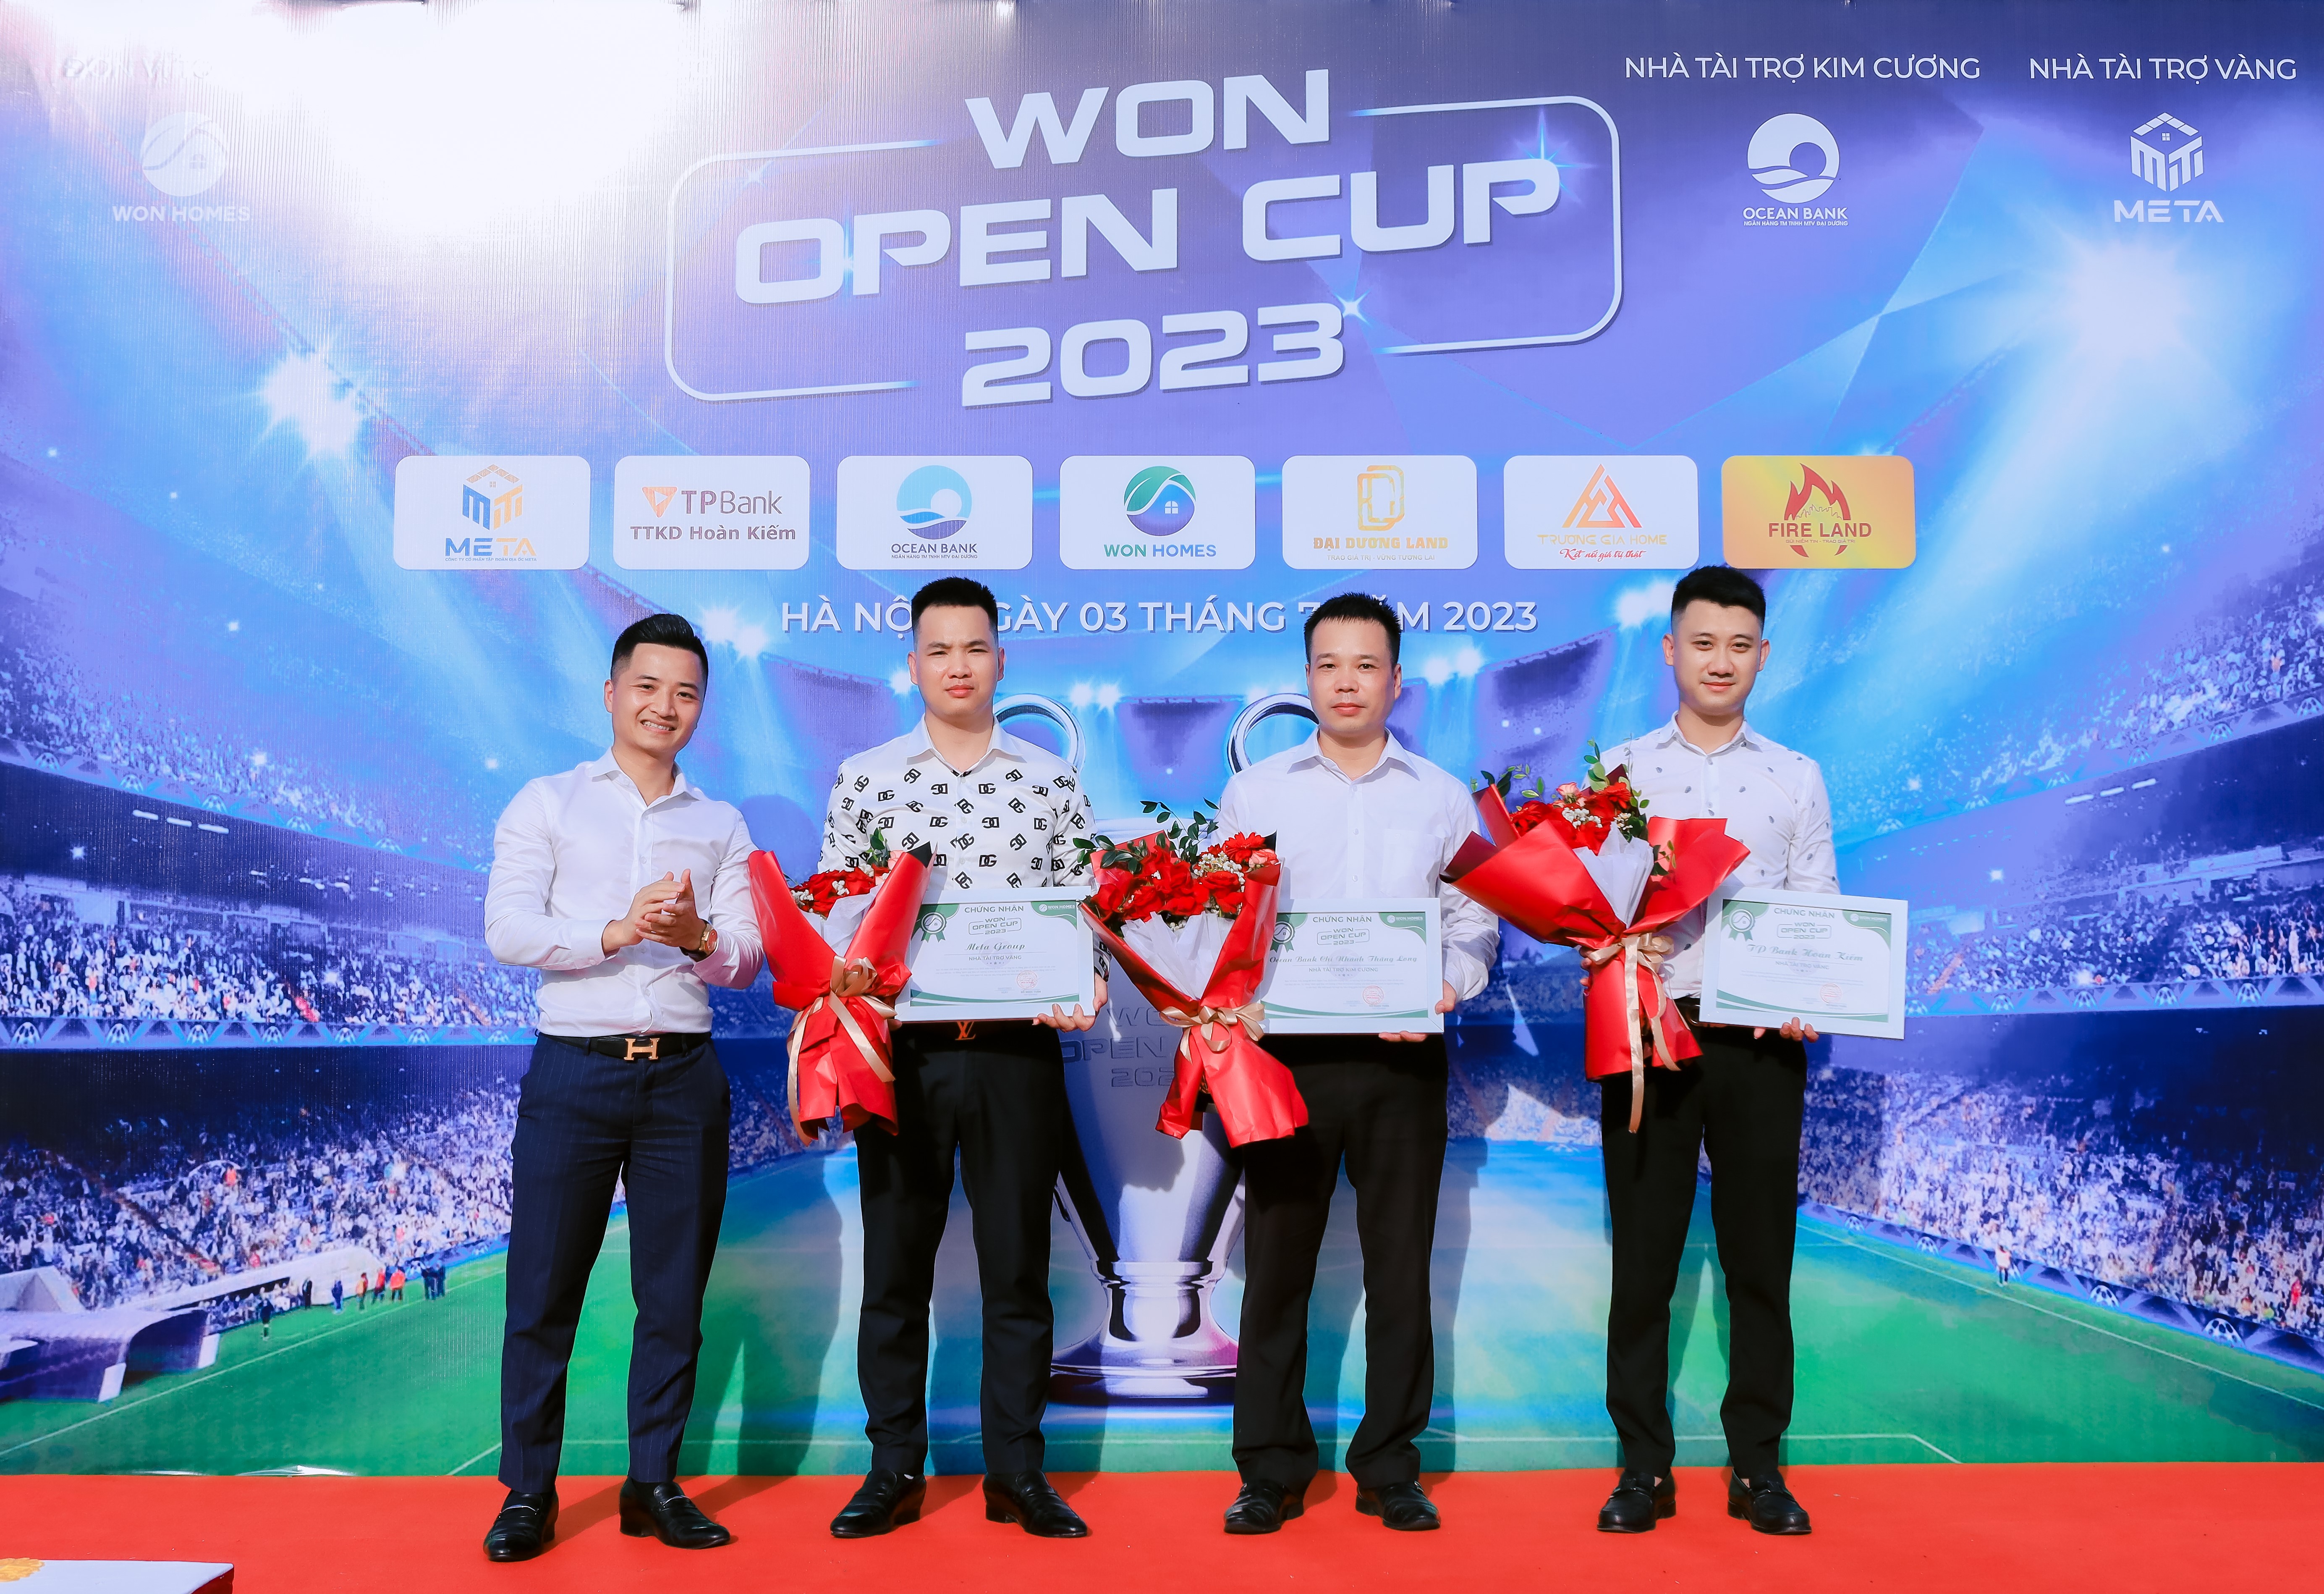 C&aacute;c nh&agrave; t&agrave;i trợ giải b&oacute;ng đ&aacute; Won Open Cup 2023